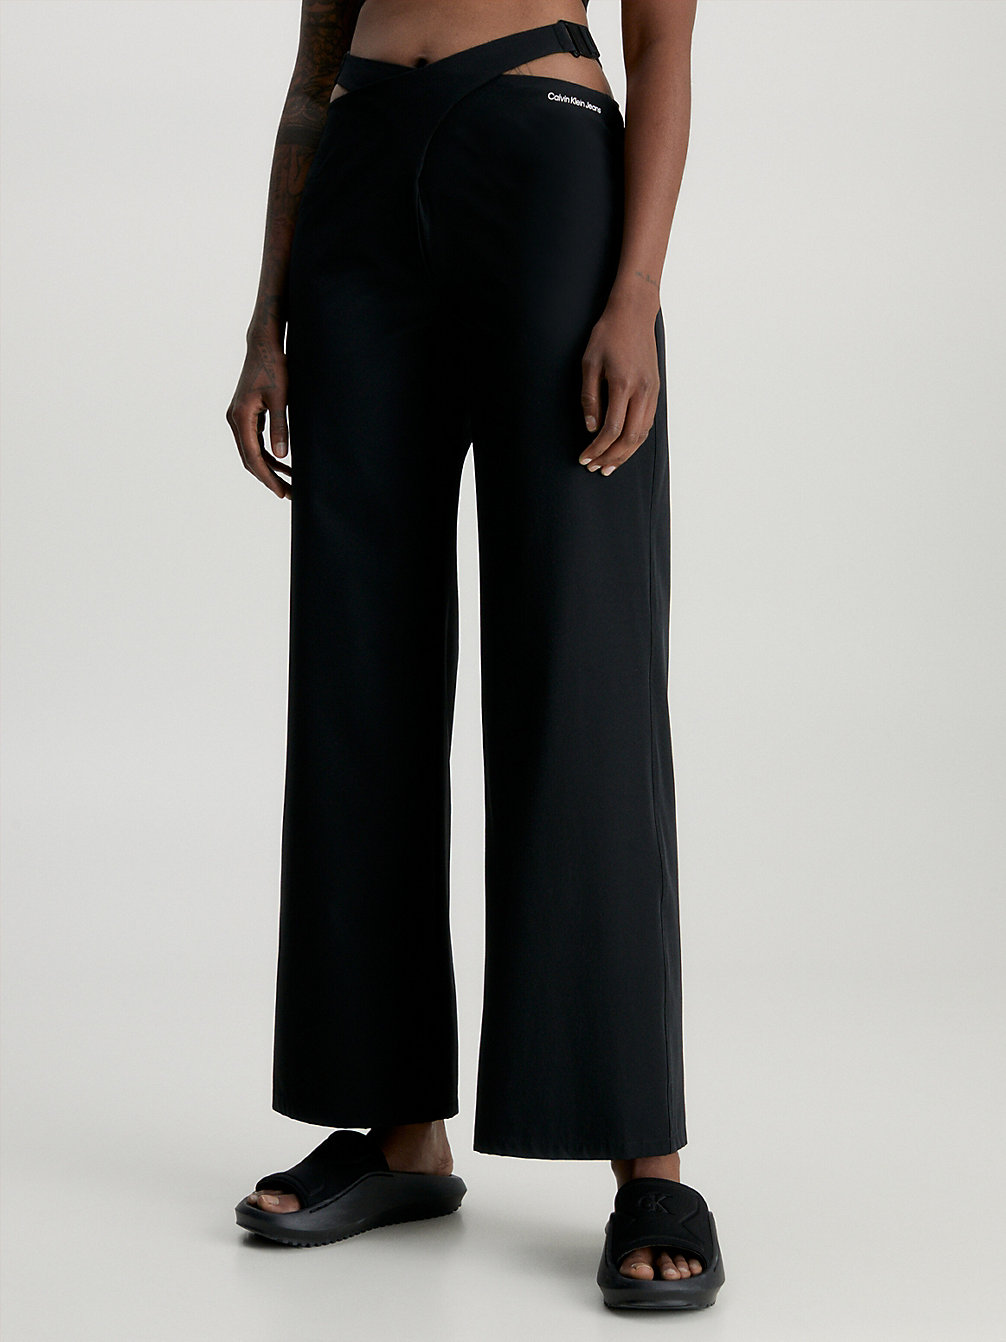 CK BLACK Recycled Cut Out Trousers undefined women Calvin Klein